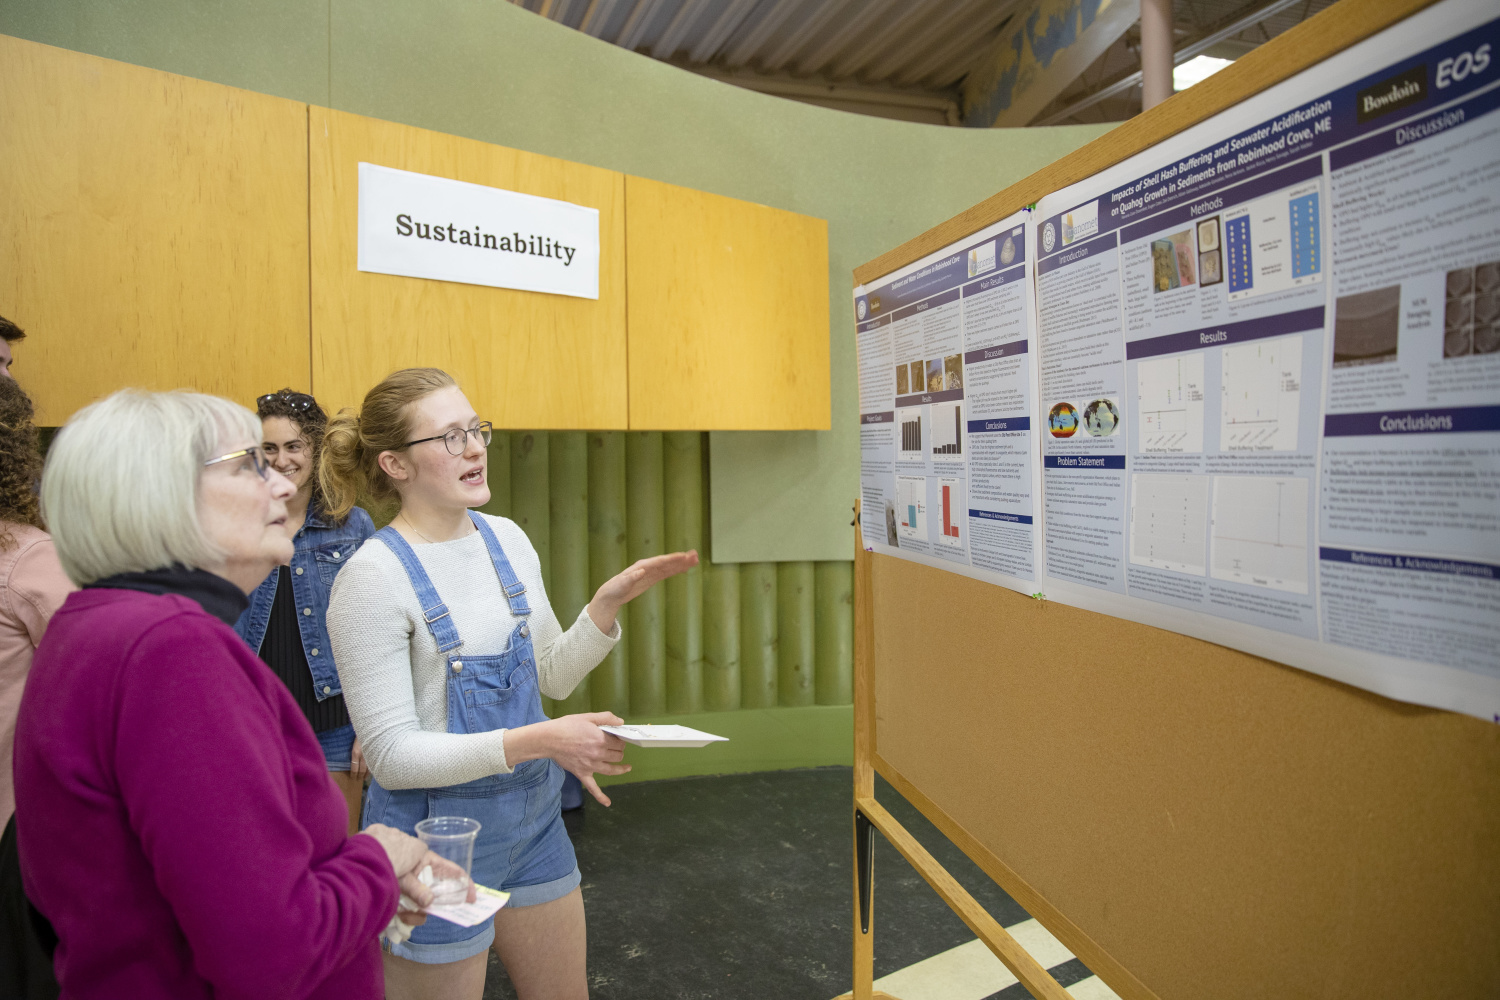 Student showcasing research on Sustainability